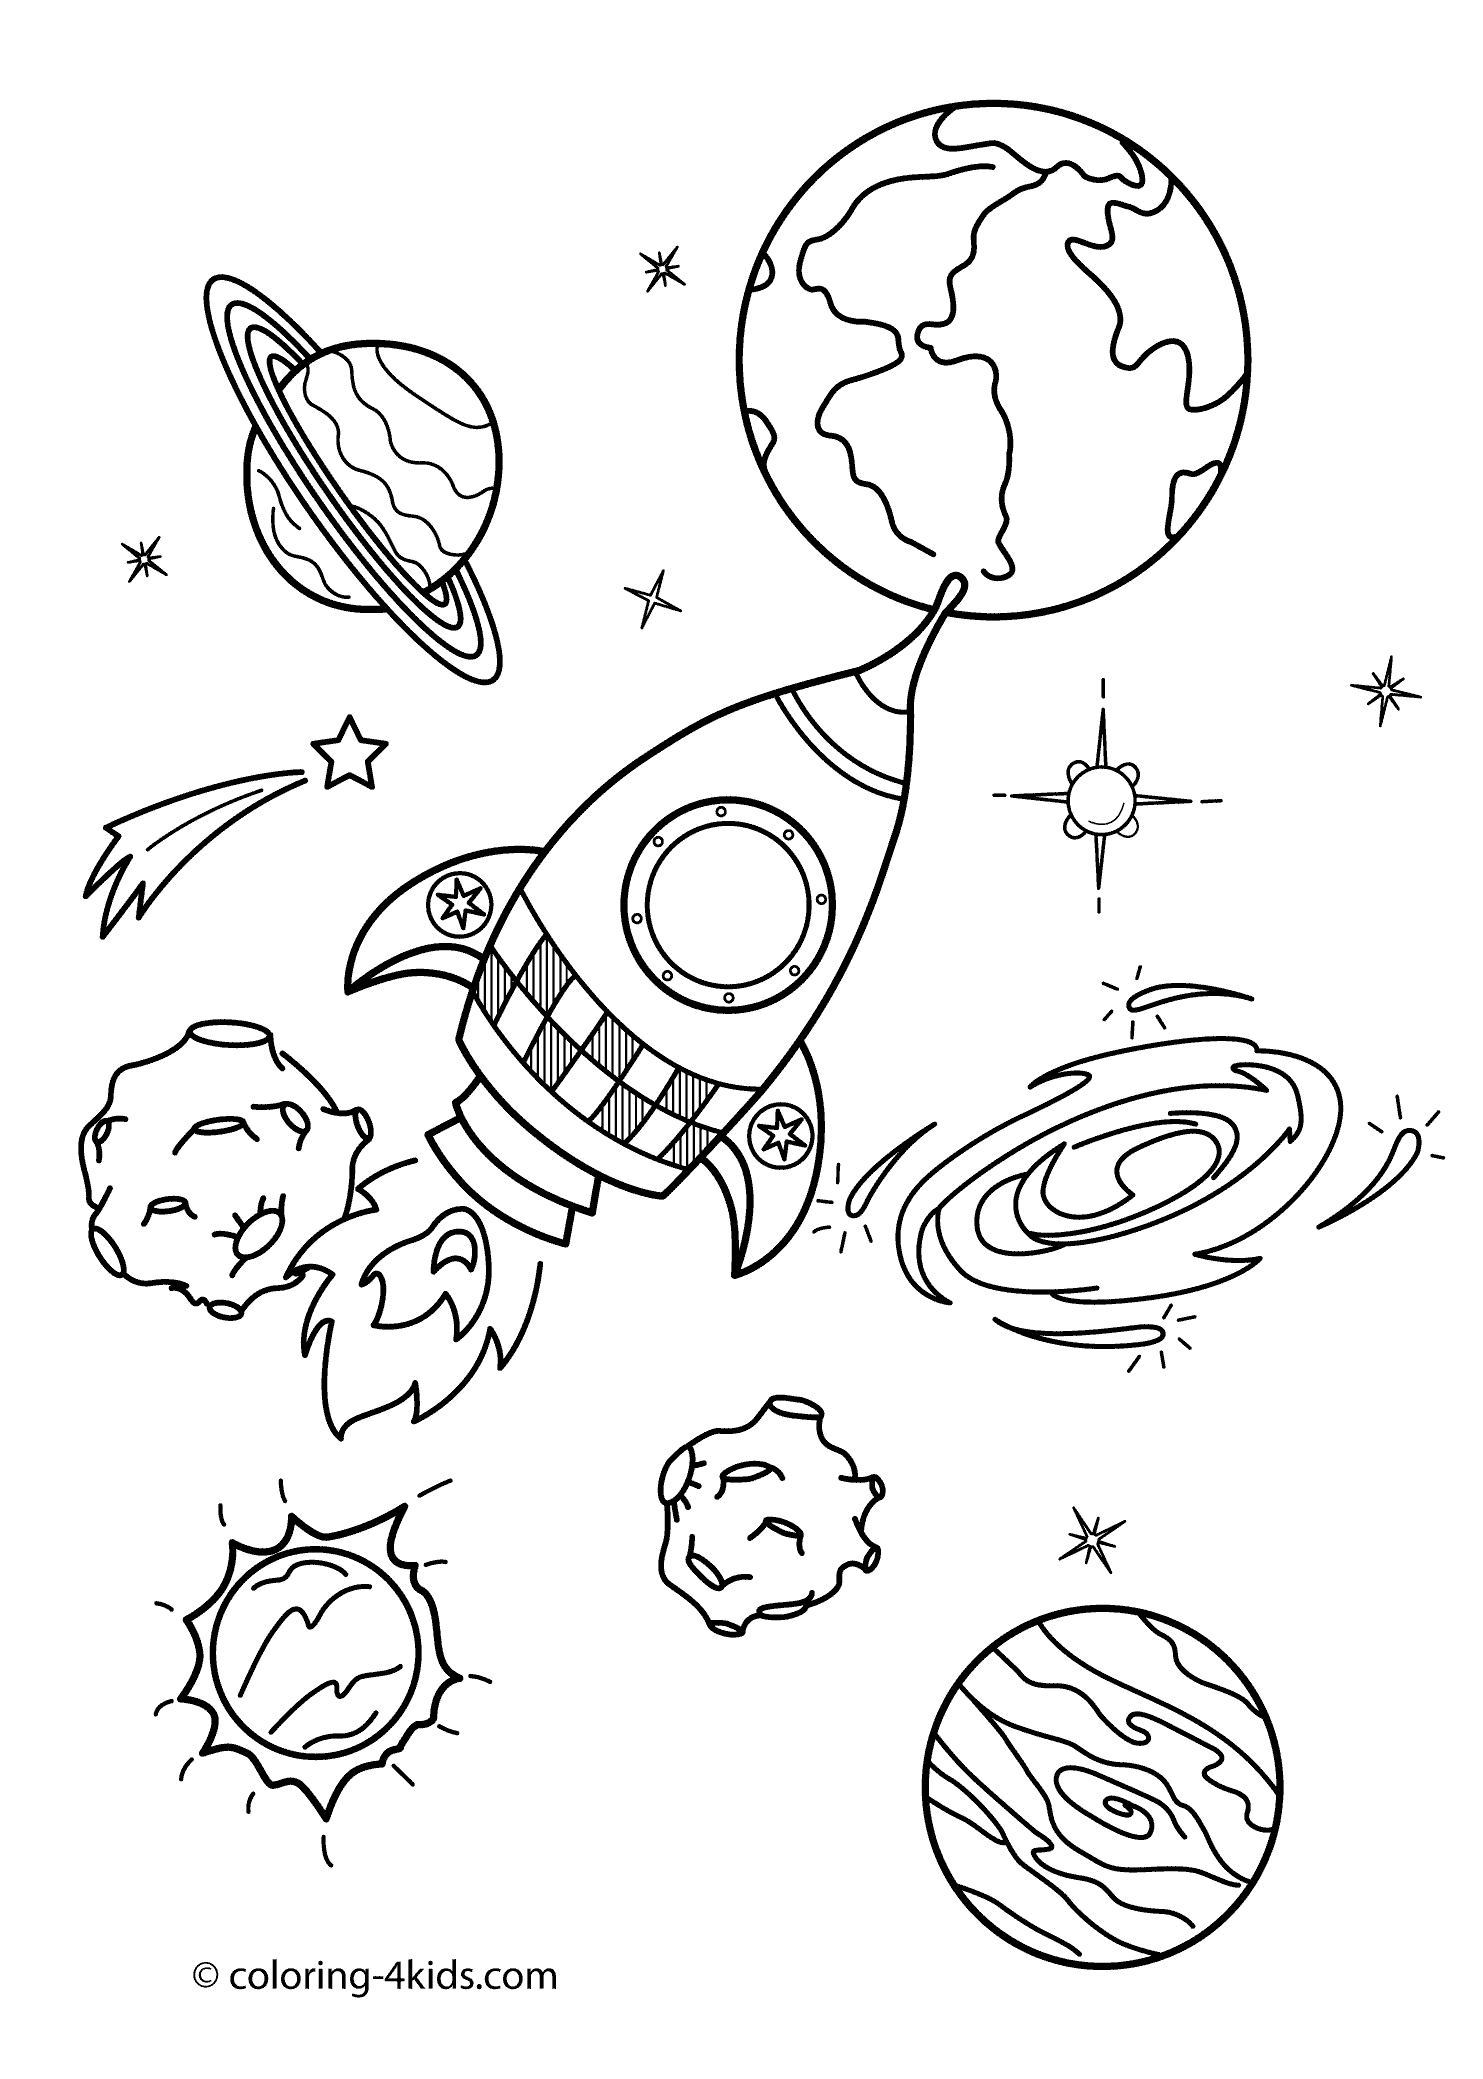 space-coloring-page-0067-q1